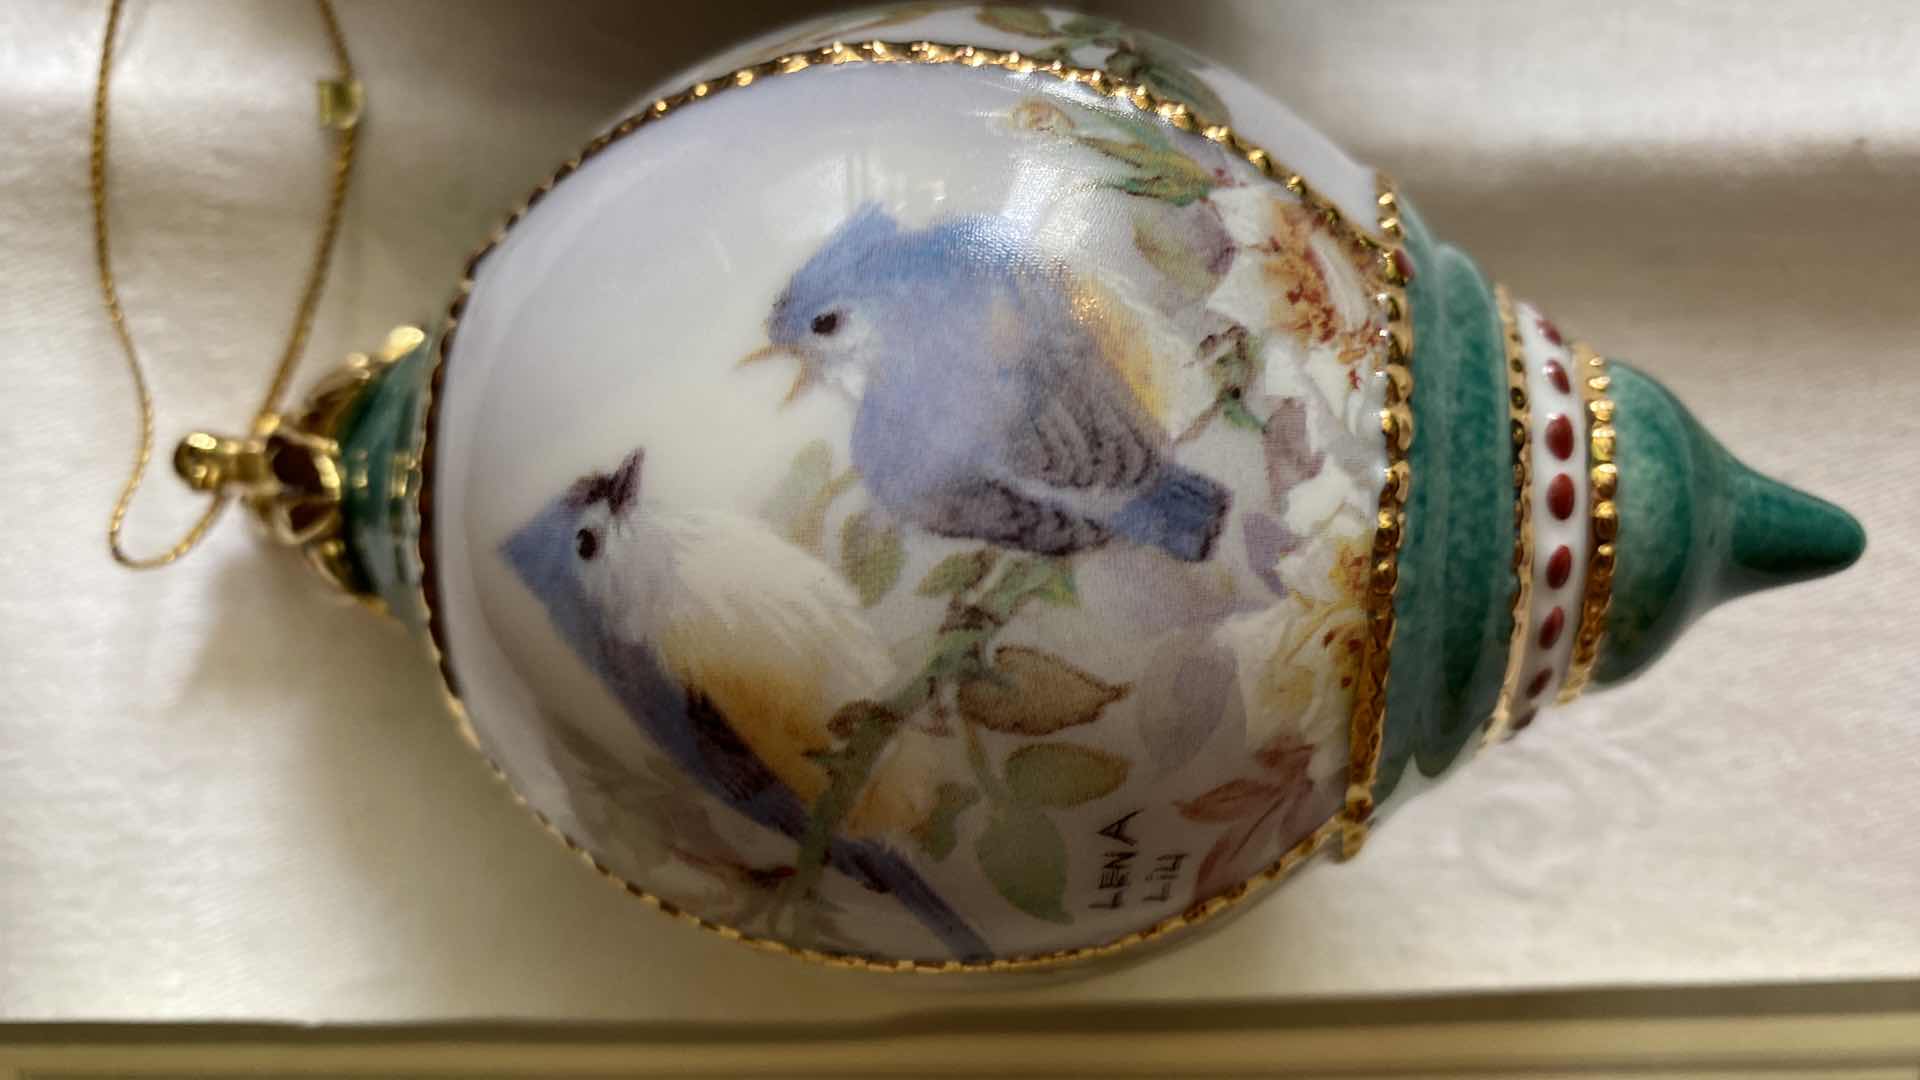 Photo 3 of $68.50 VINTAGE THREE LENA LIU’s NATURES POETRY PORCELAIN ORNAMENTS COLLECTIBLES BY BRADFORD EXCHANGE WITH CERTIFICATE OF AUTHENTICITY